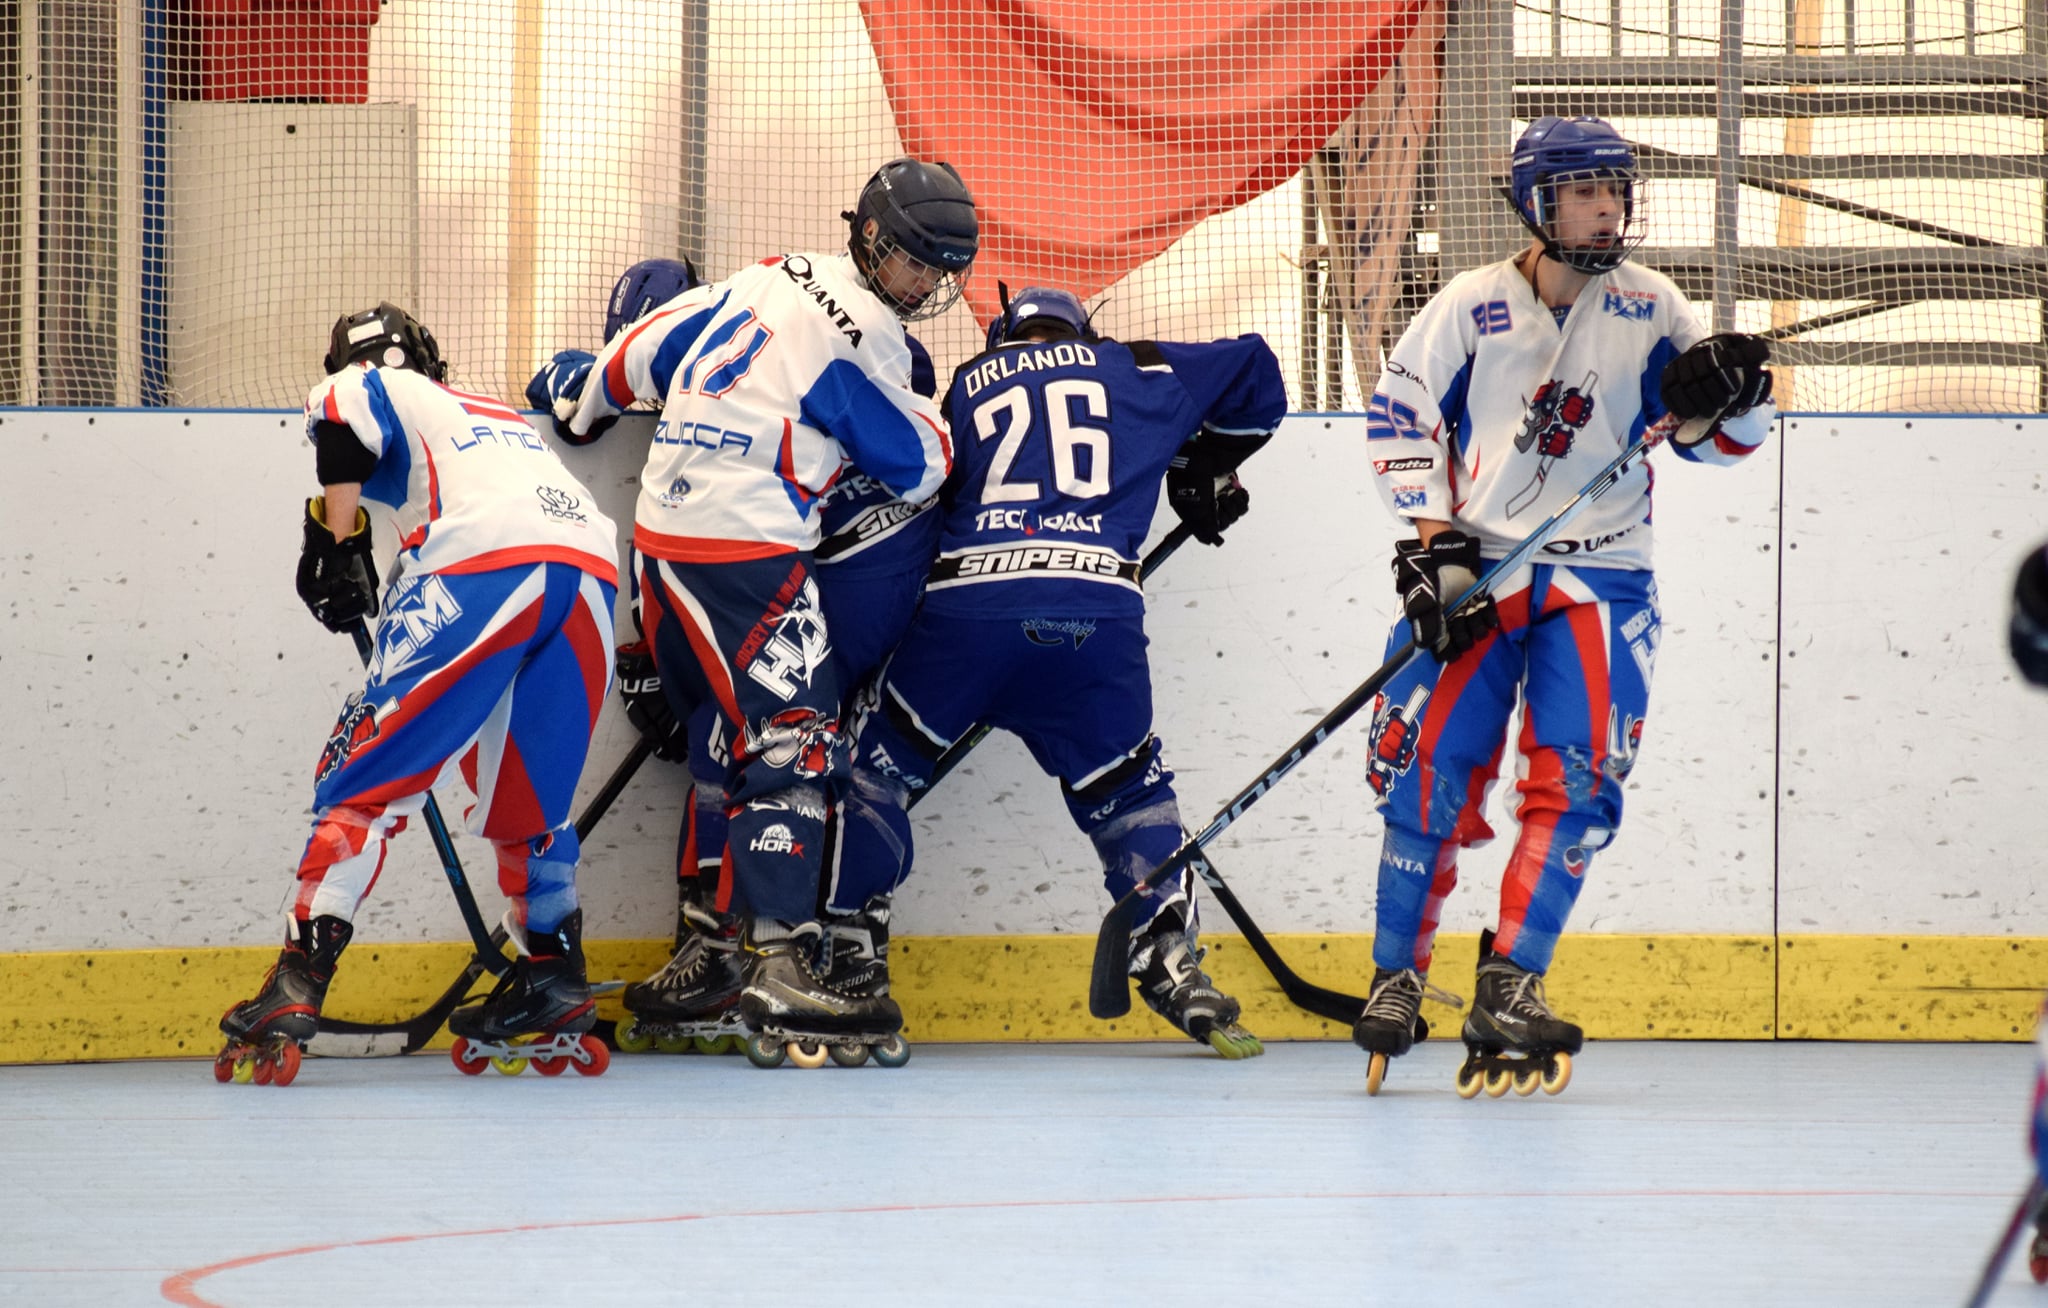 Hockey in line, Snipers Pizzeria Red Carpet ko con onore a Milano